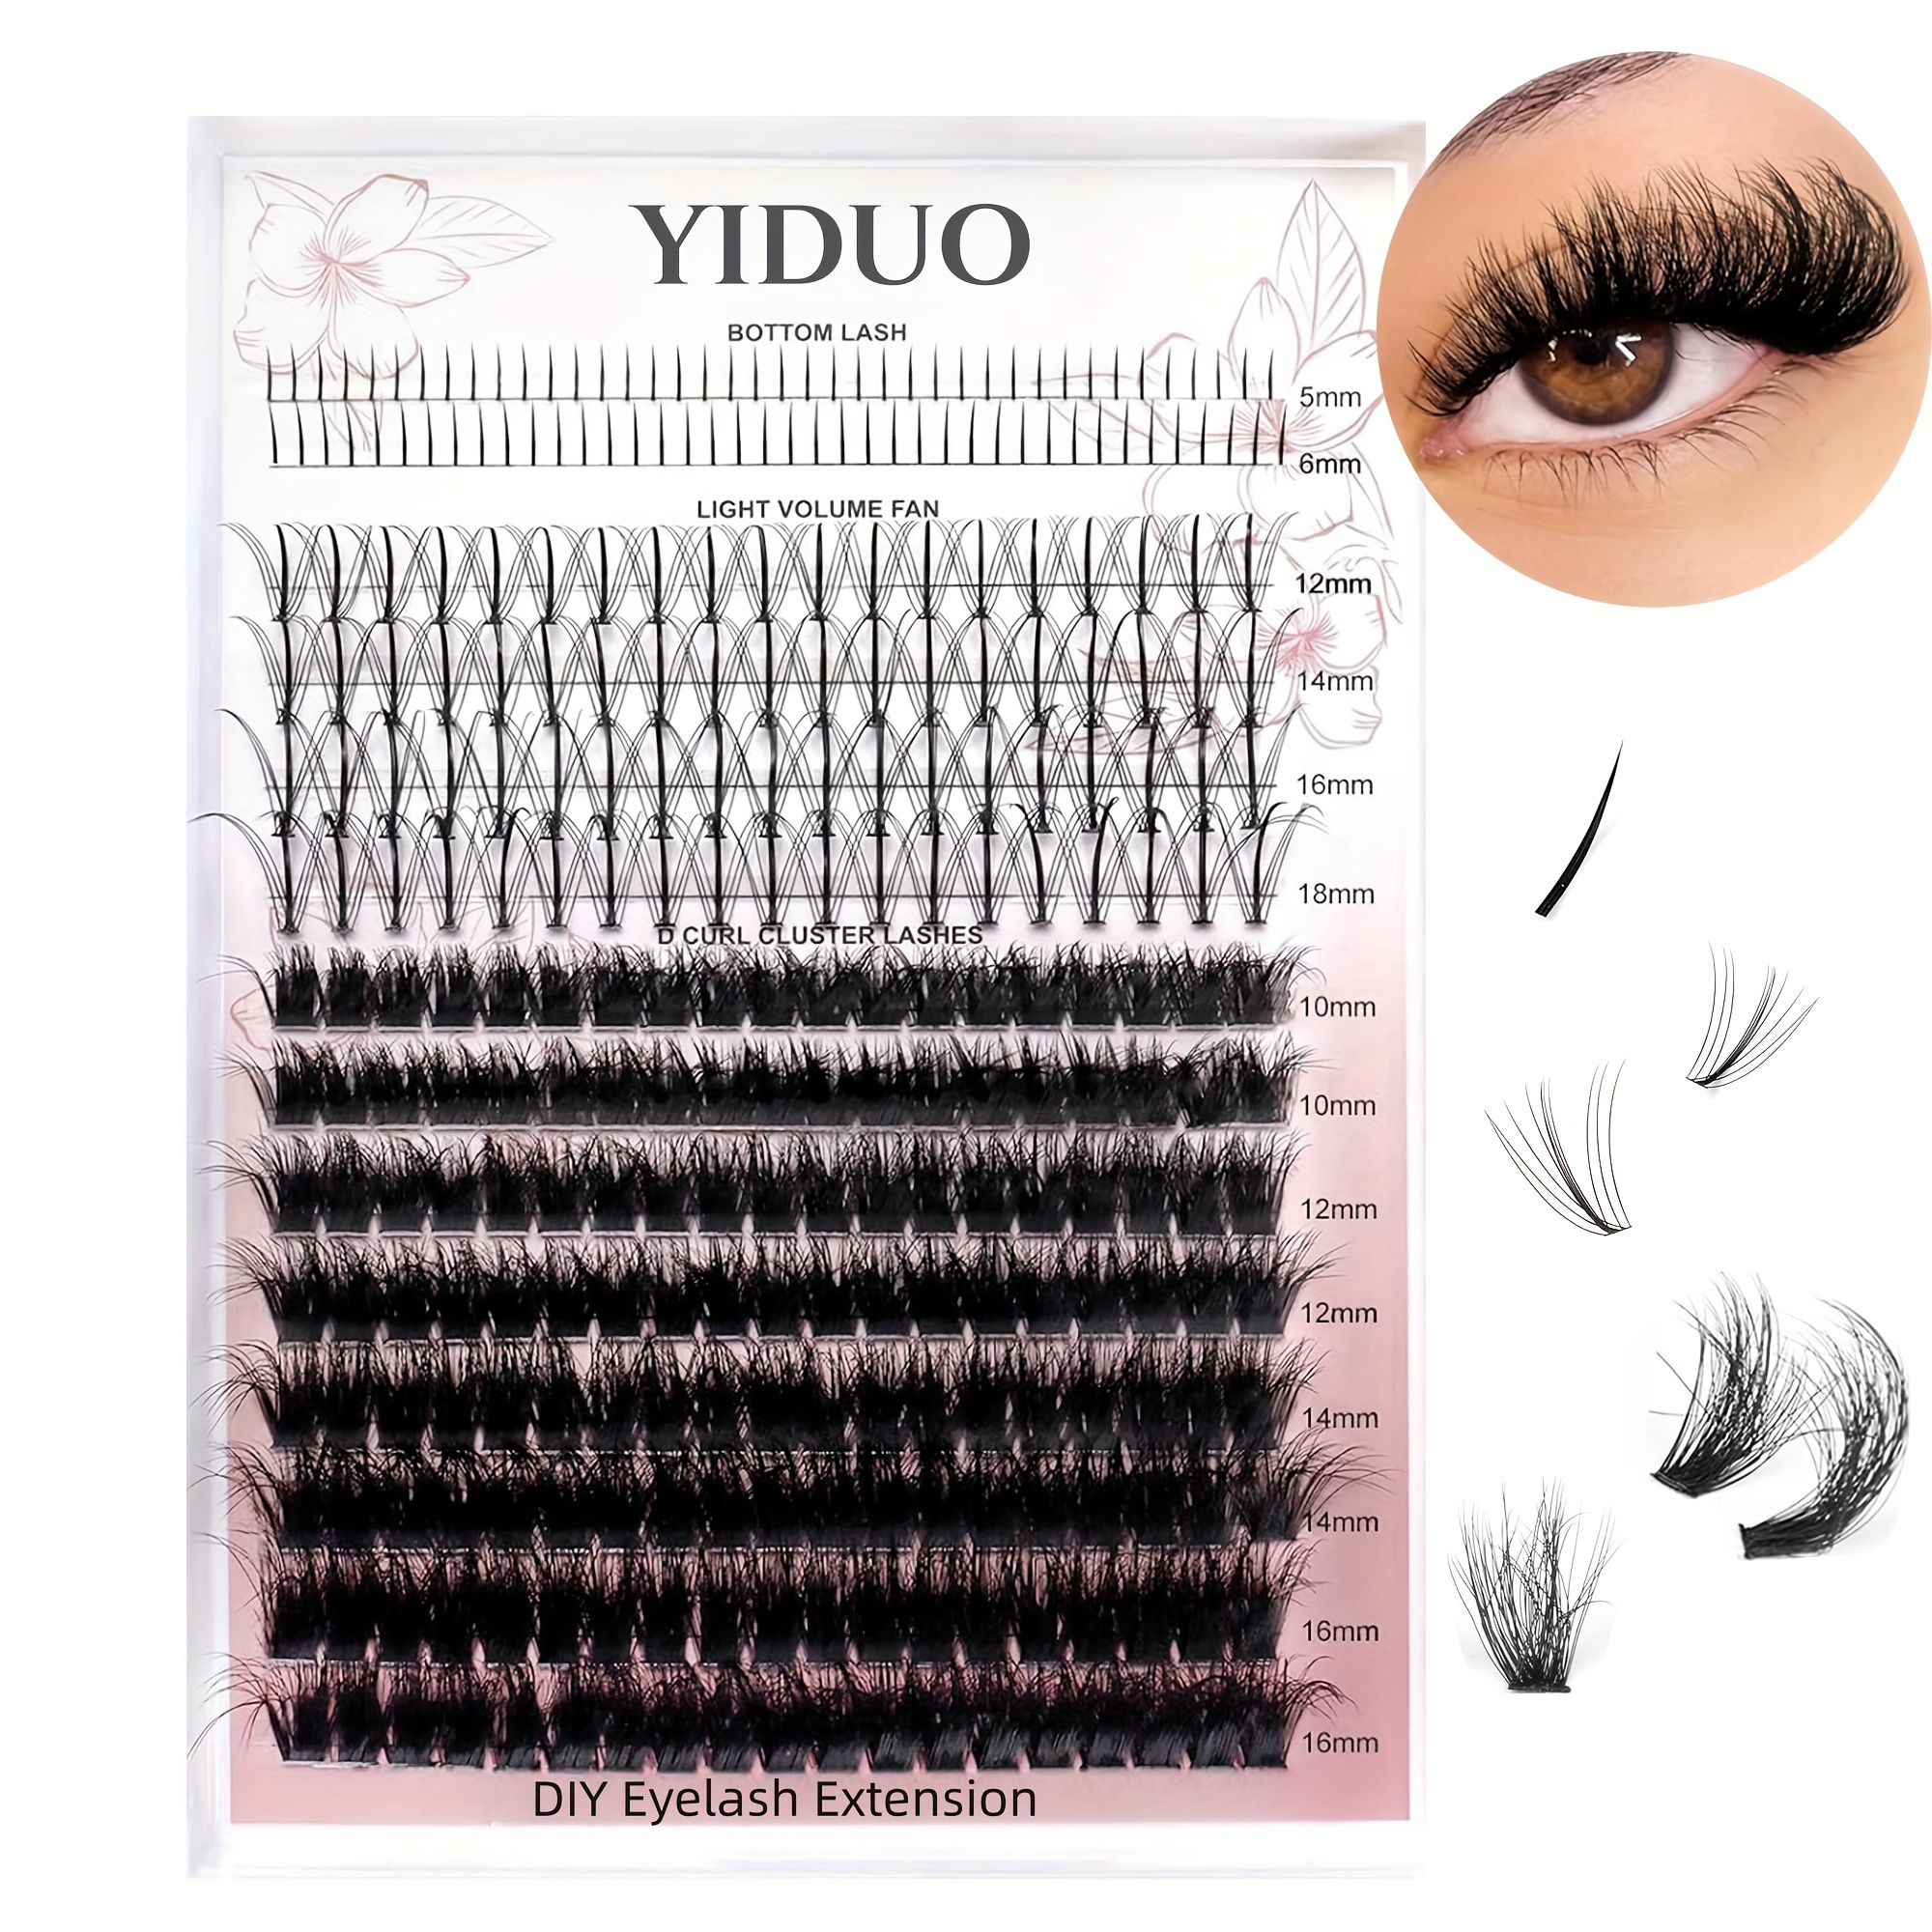 

320pcs Fluffy Cluster Eyelash Extensions 7d Spike Fan Eyelash Clusters With Bottom Lashes With Fluffy Cluster Eyelash Diy Cat-eye Lashes At Home (5-18mm Mixed)